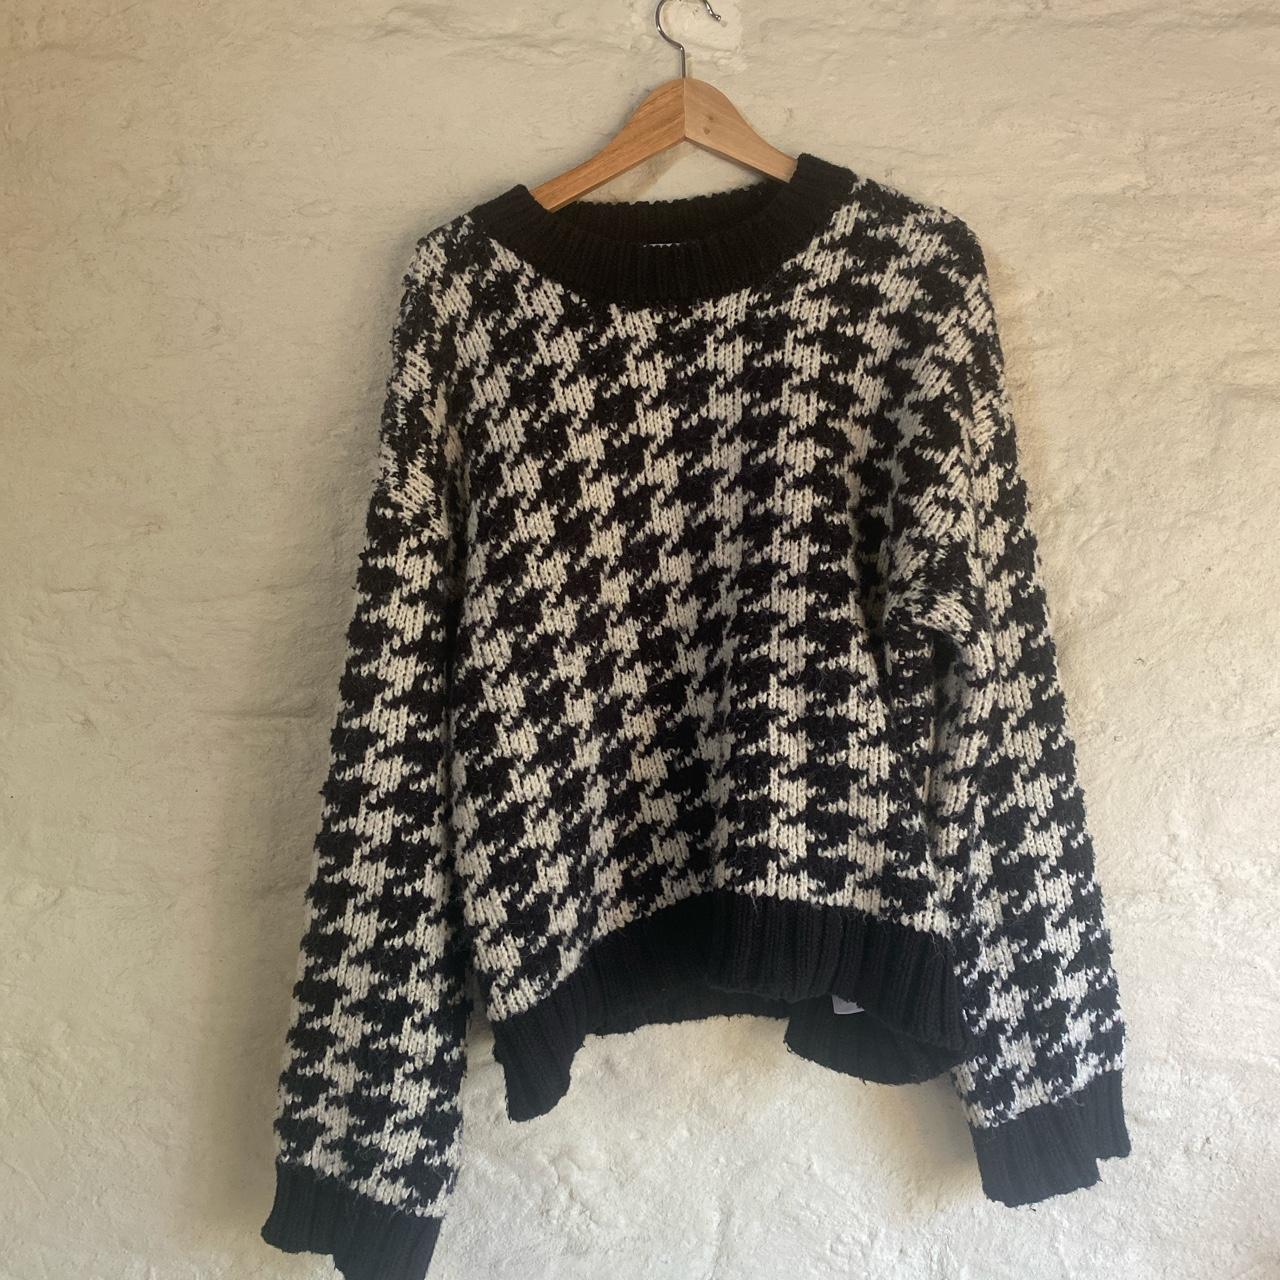 Knitted Zara houndstooth black-and-white sweater,... - Depop